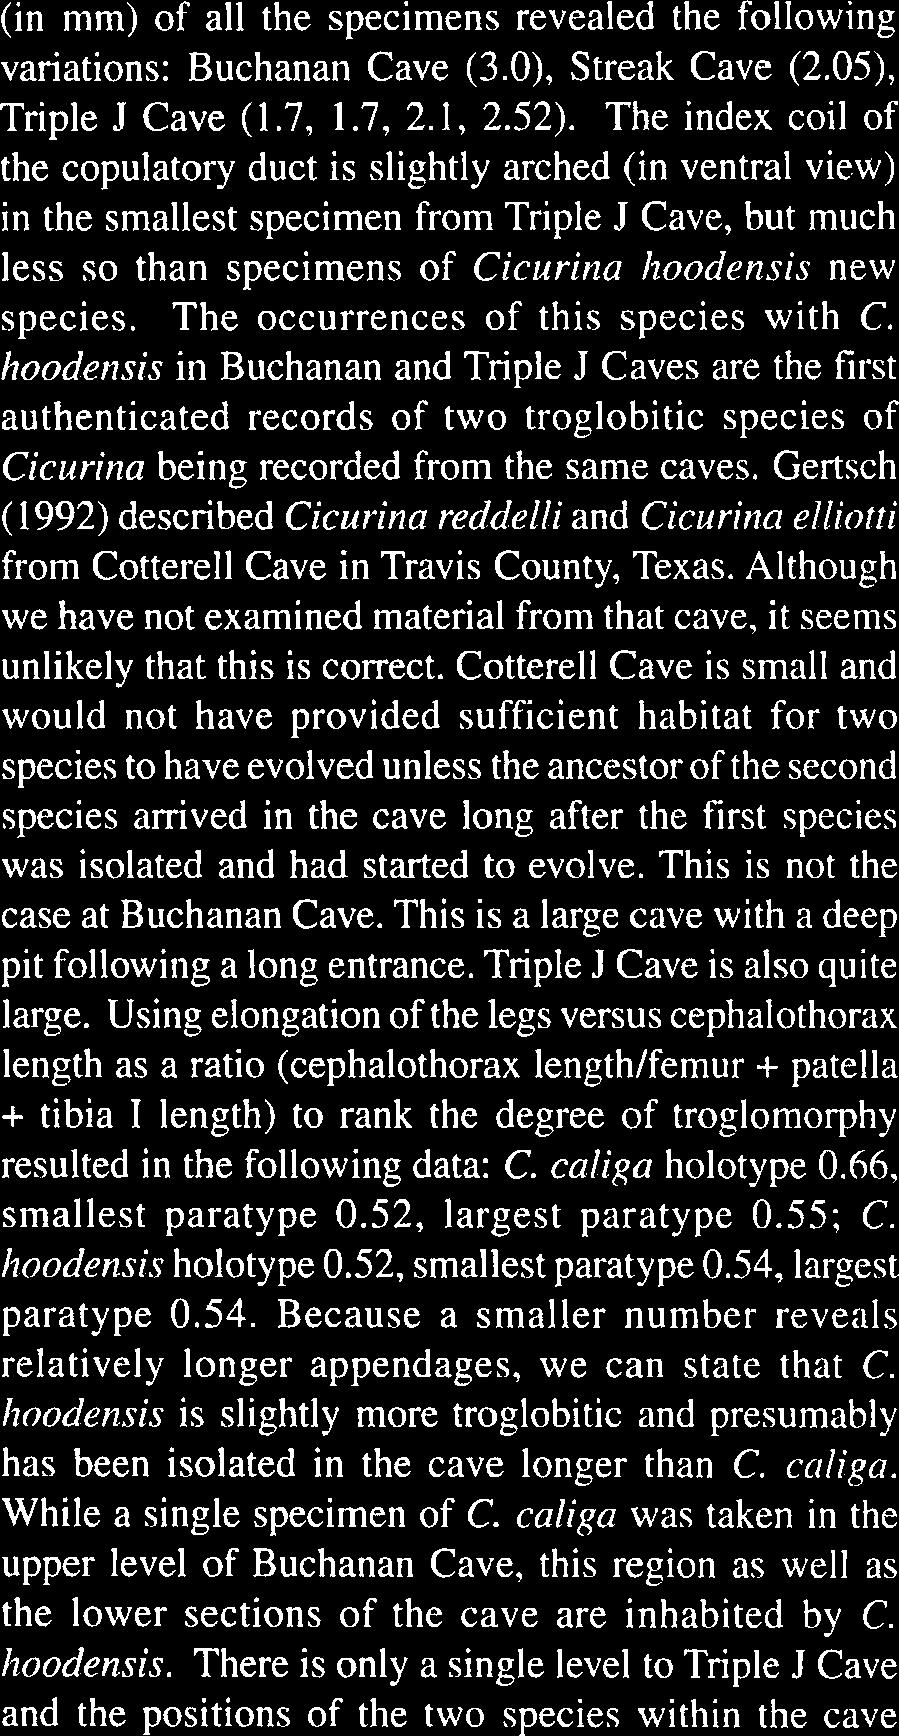 cave long after the first species was isolated and had started to evolve. This is not the case at Buchanan Cave.